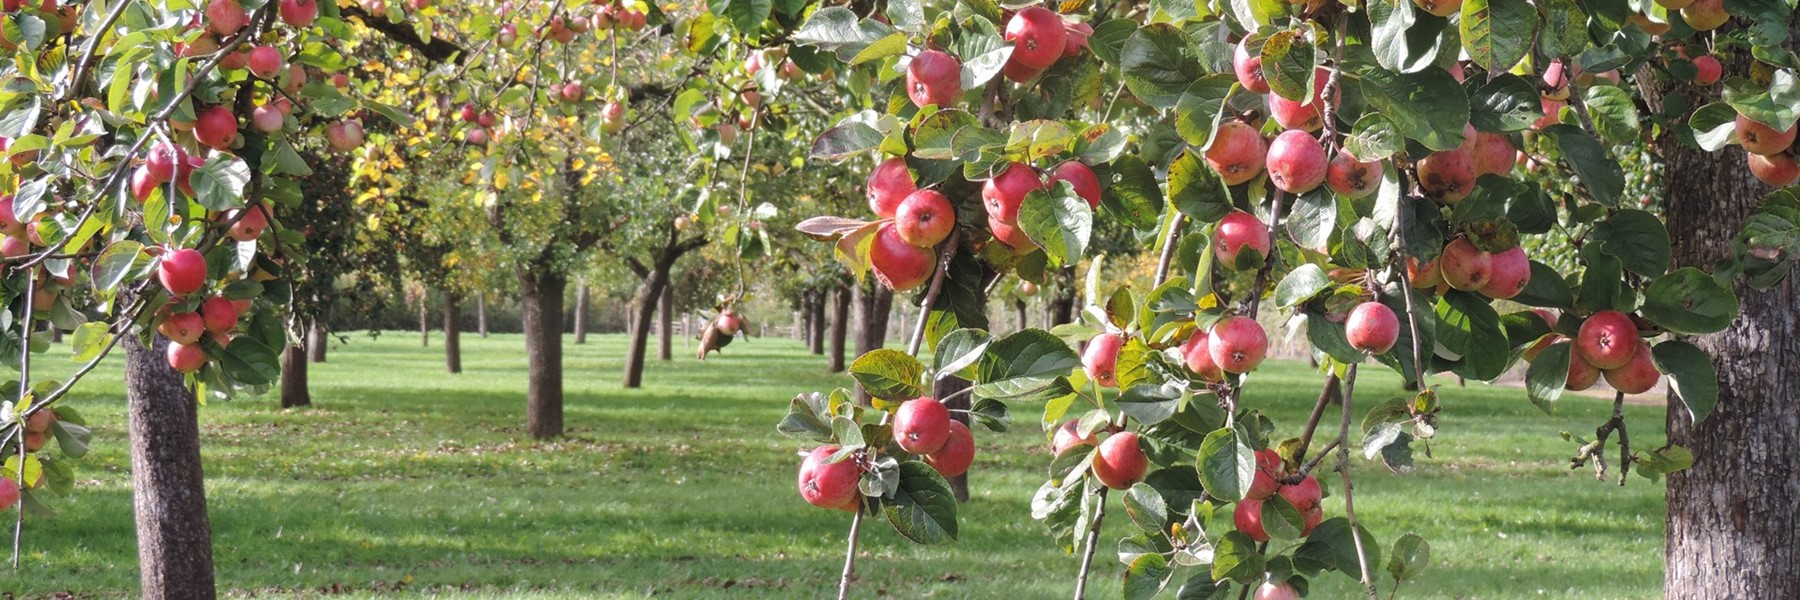 orchards-apples